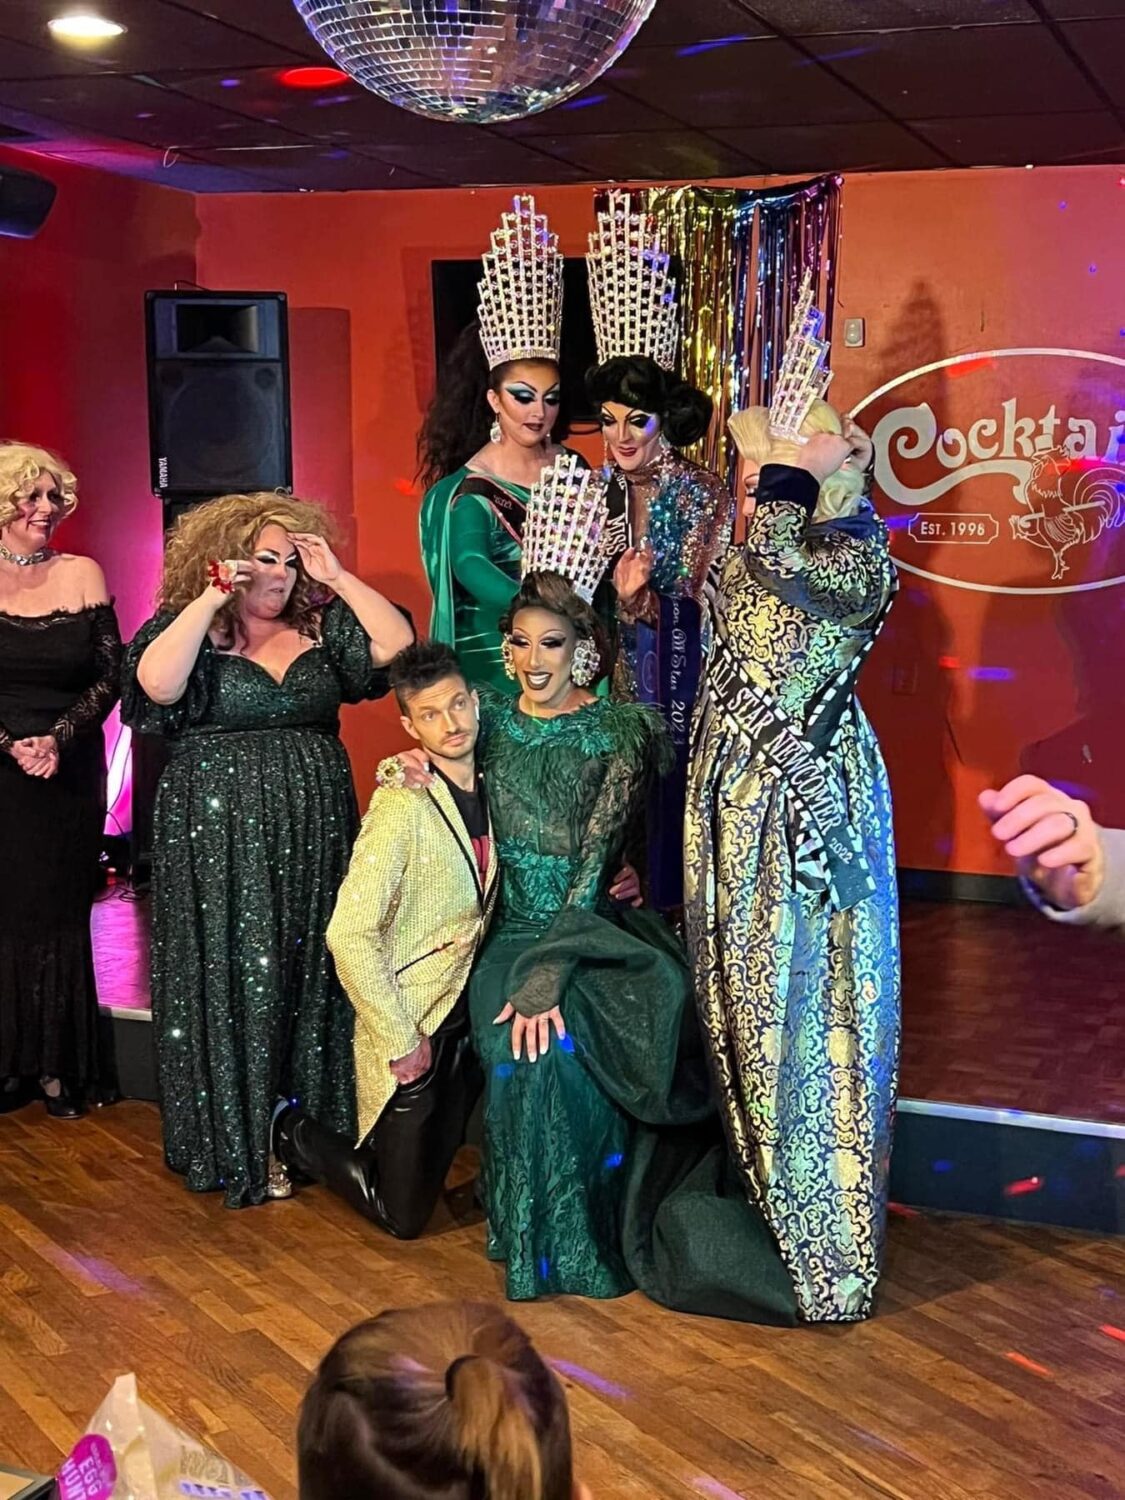 Travis Martinez offers a knee to Pineapple Peruu as she is crowned Miss Akron All-Star 2023 by Lady B Aura, Malibu Peruu and Zoey Zegai. | Akron All-Star Pageant | Cocktails (Akron, Ohio) | 2/18/2023